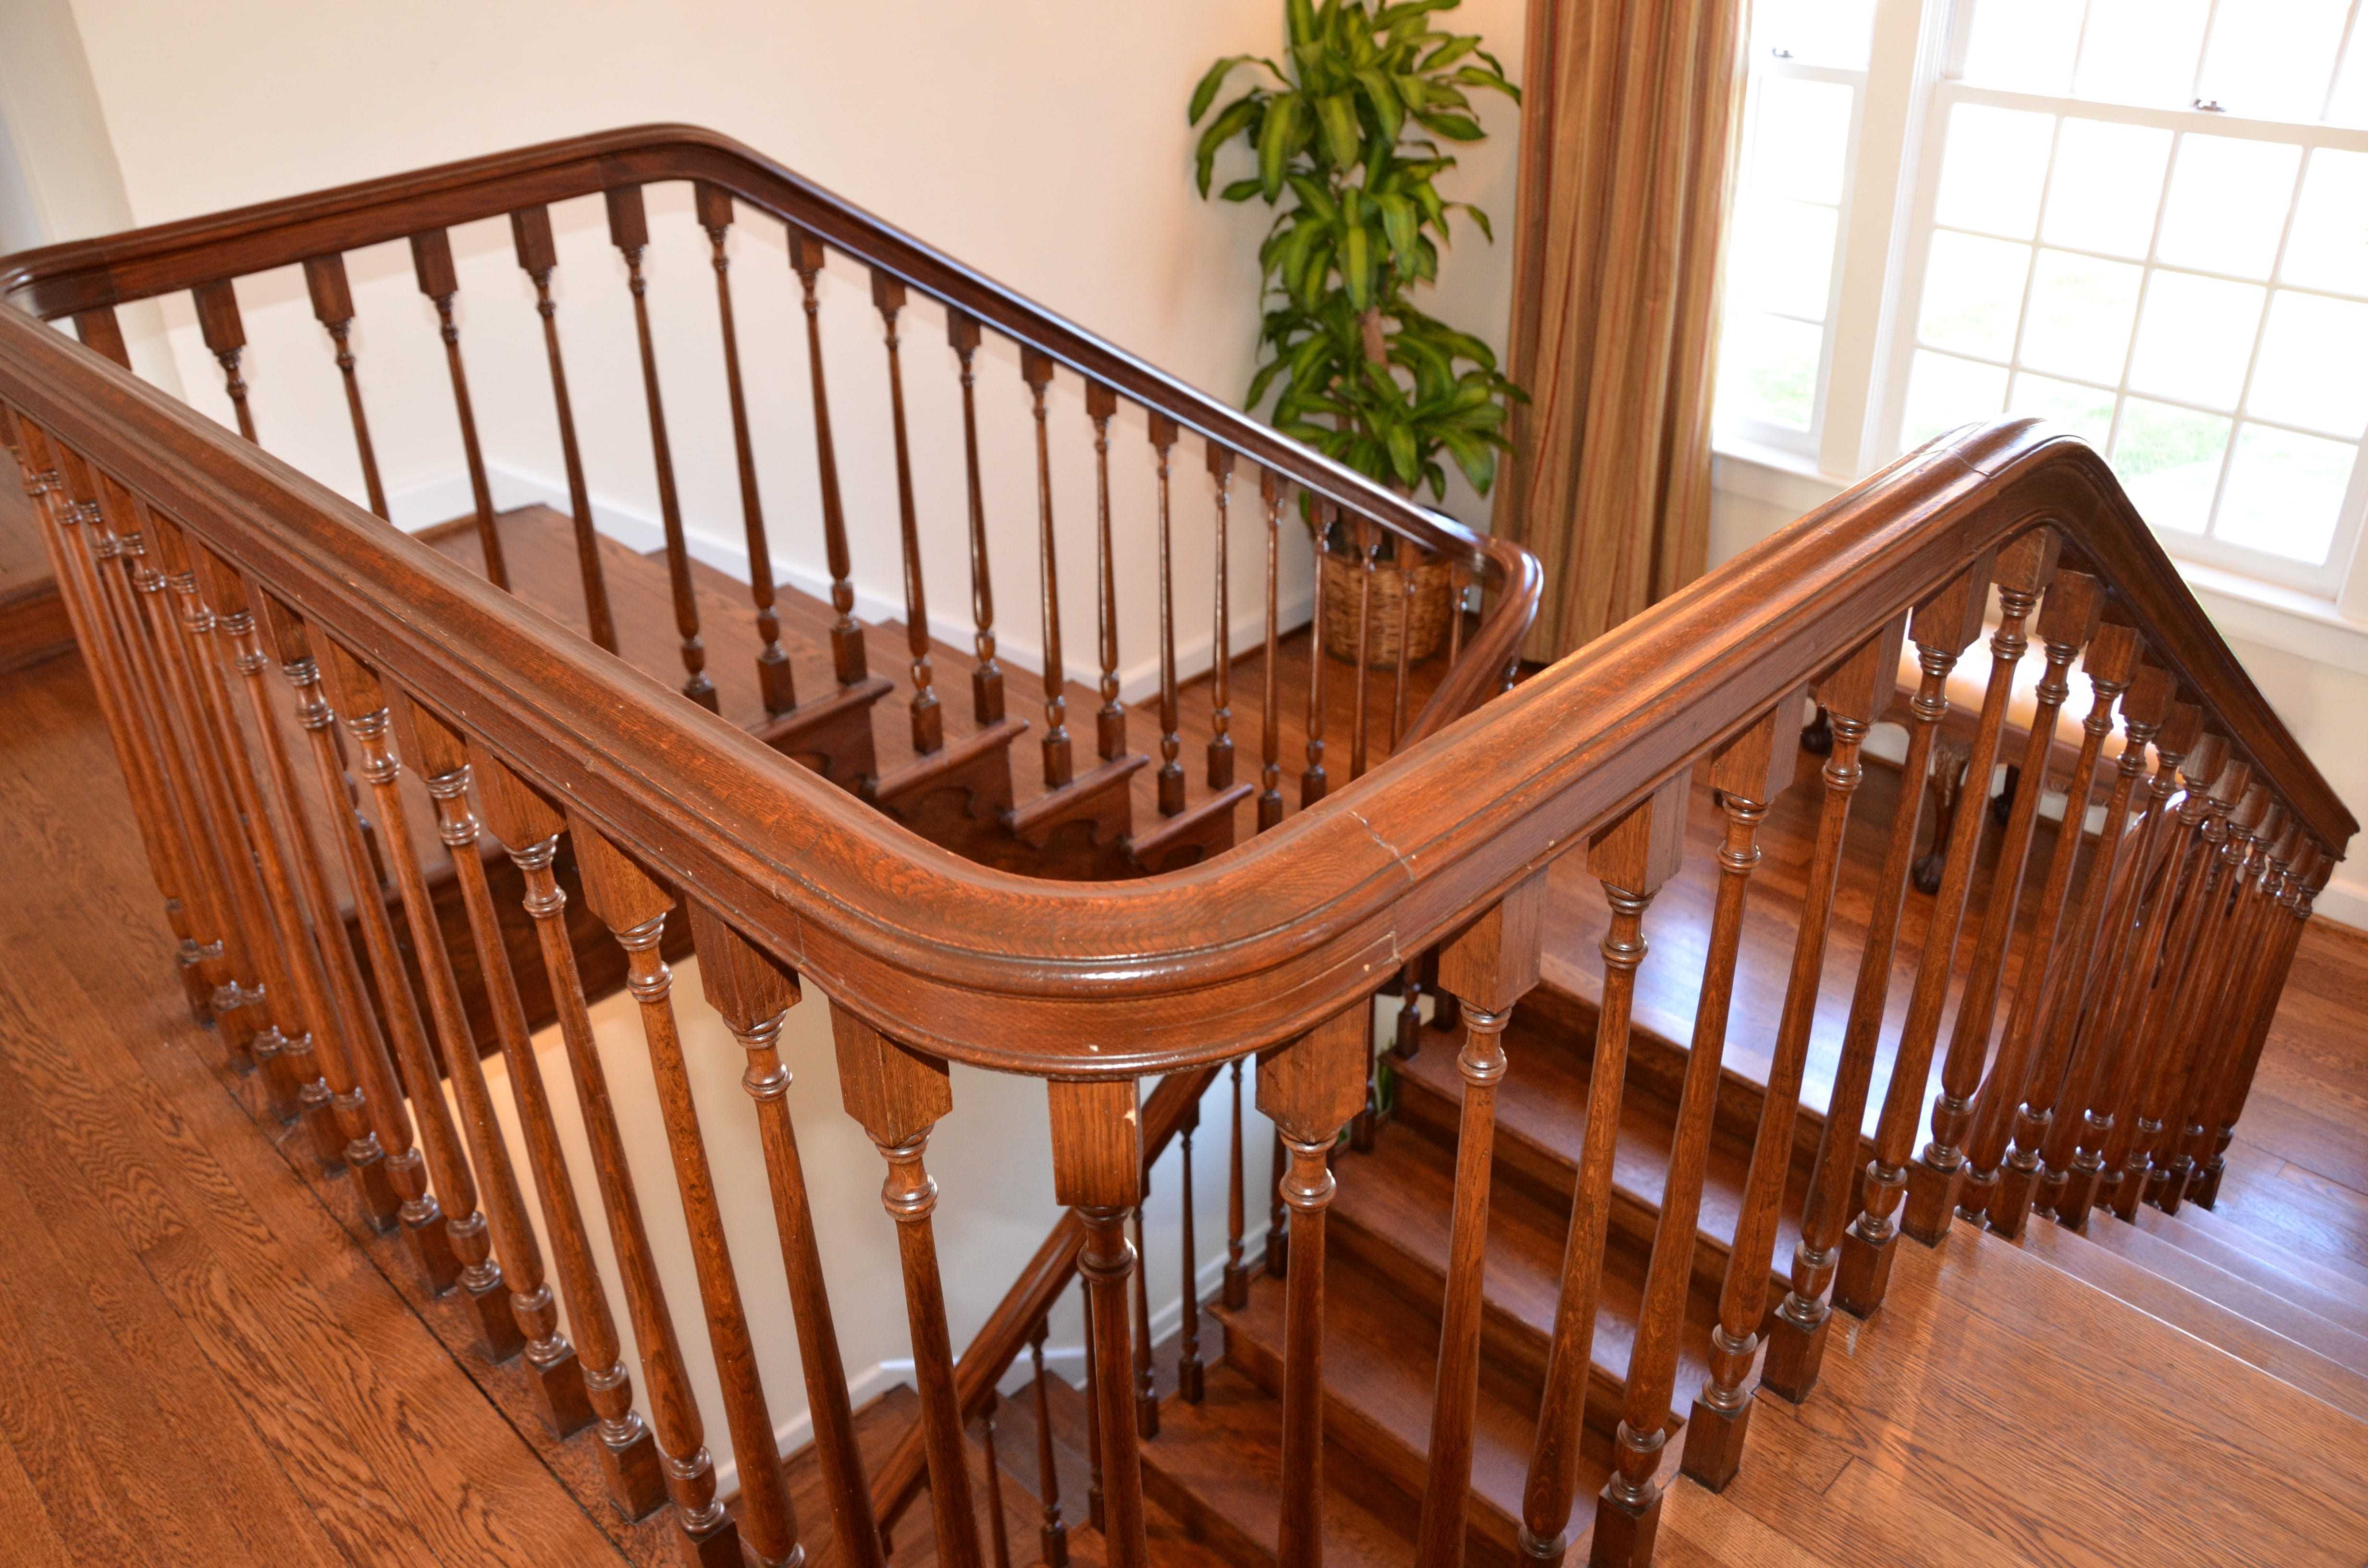 A shot from the second floor looking down at the wooden staircase and its wrap around bannister.